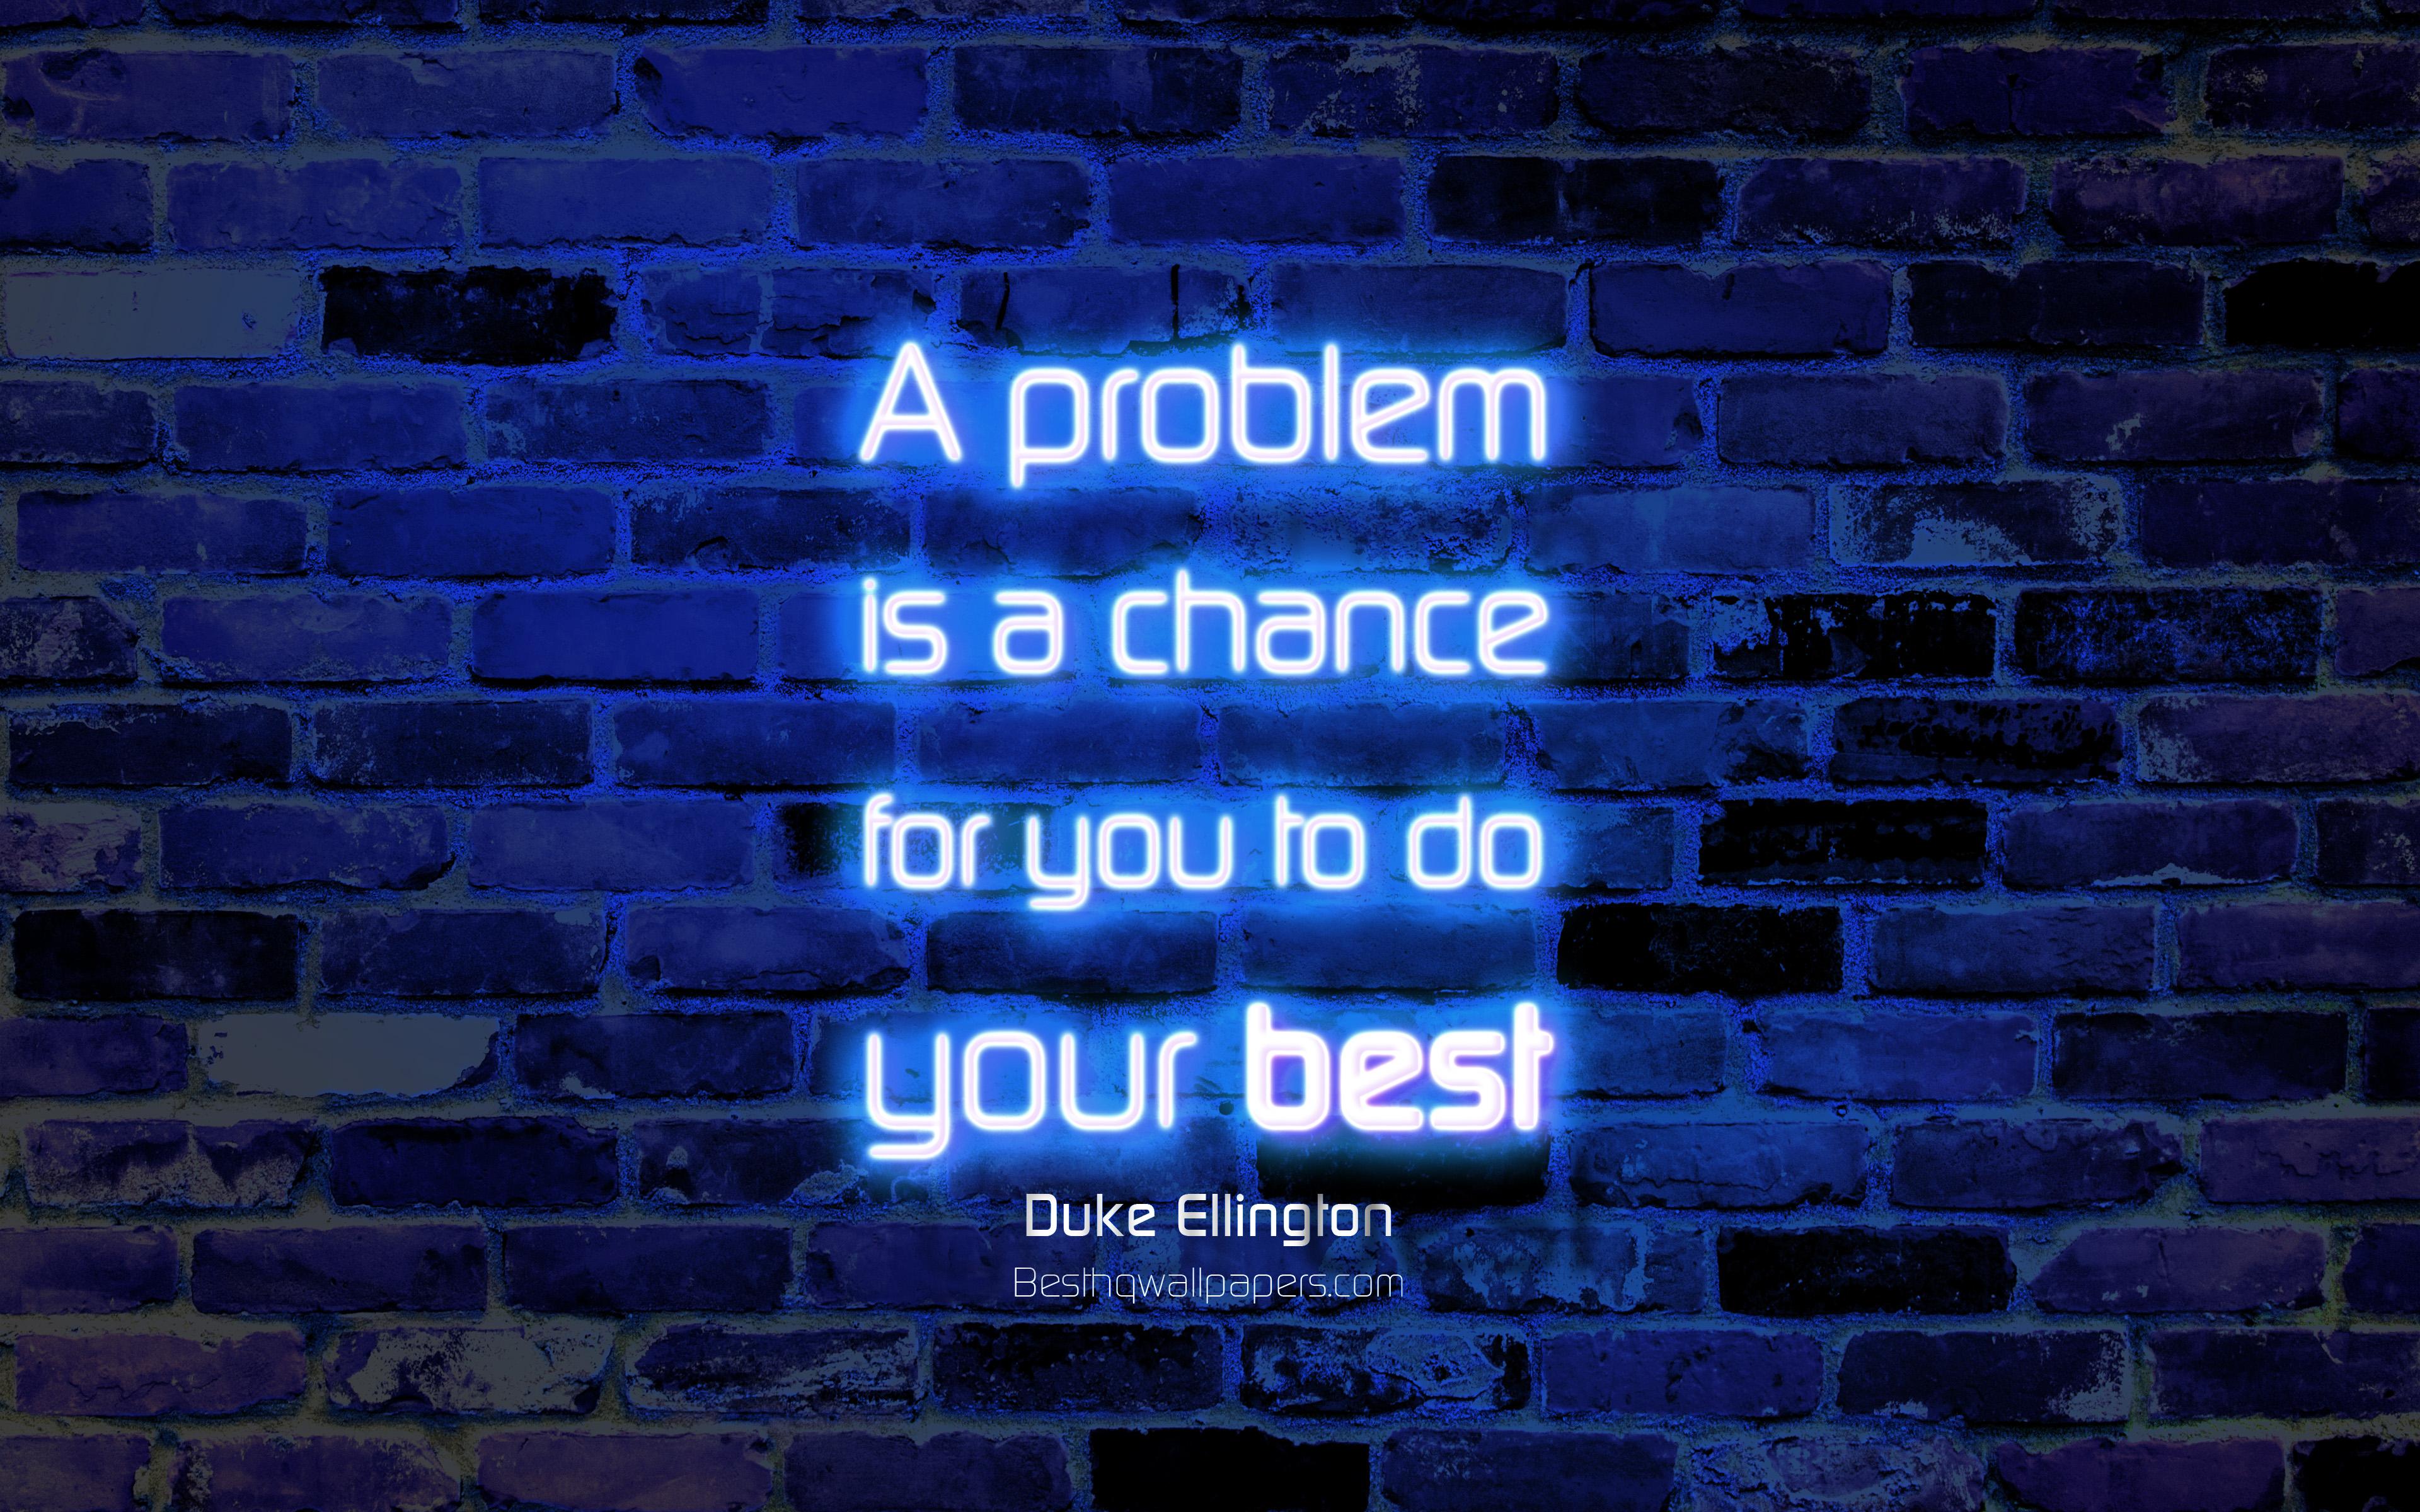 Download wallpaper A problem is a chance for you to do your